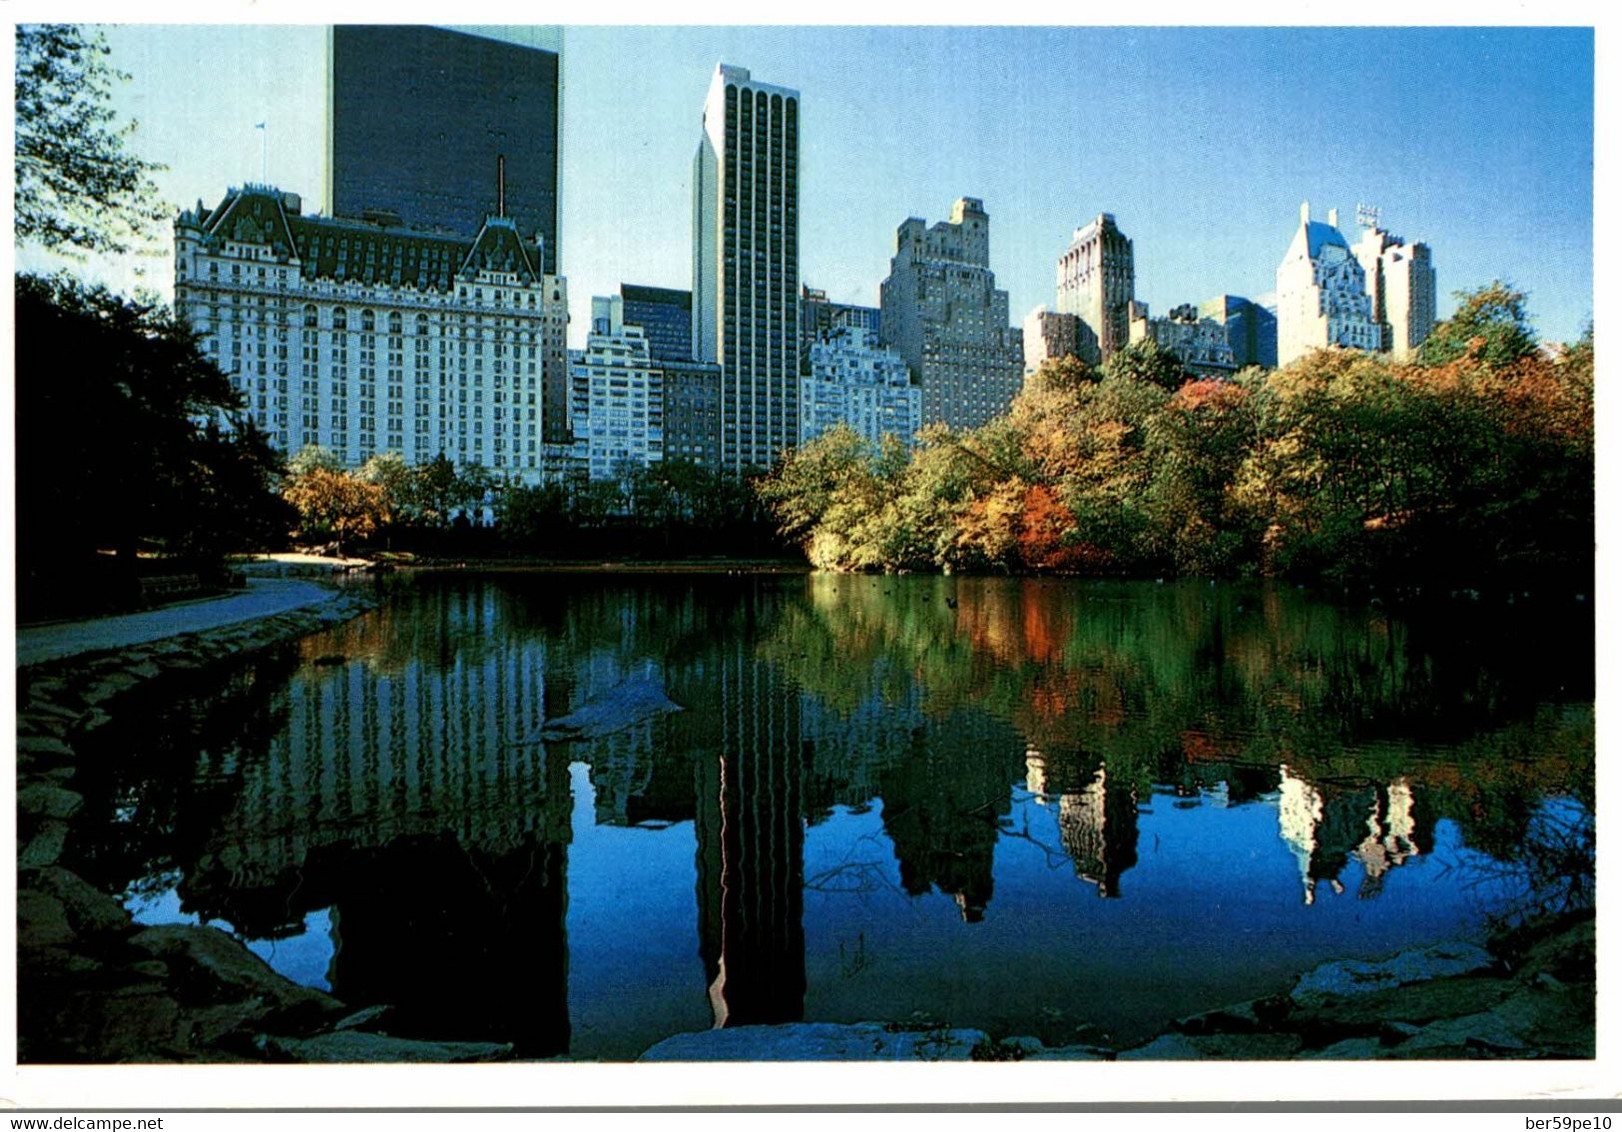 USA SOME OF NEW YORK'S FINEST HOTELS ARE MIRRORED ON CENTRAL PARK'S FABULOUS LAKE - Central Park